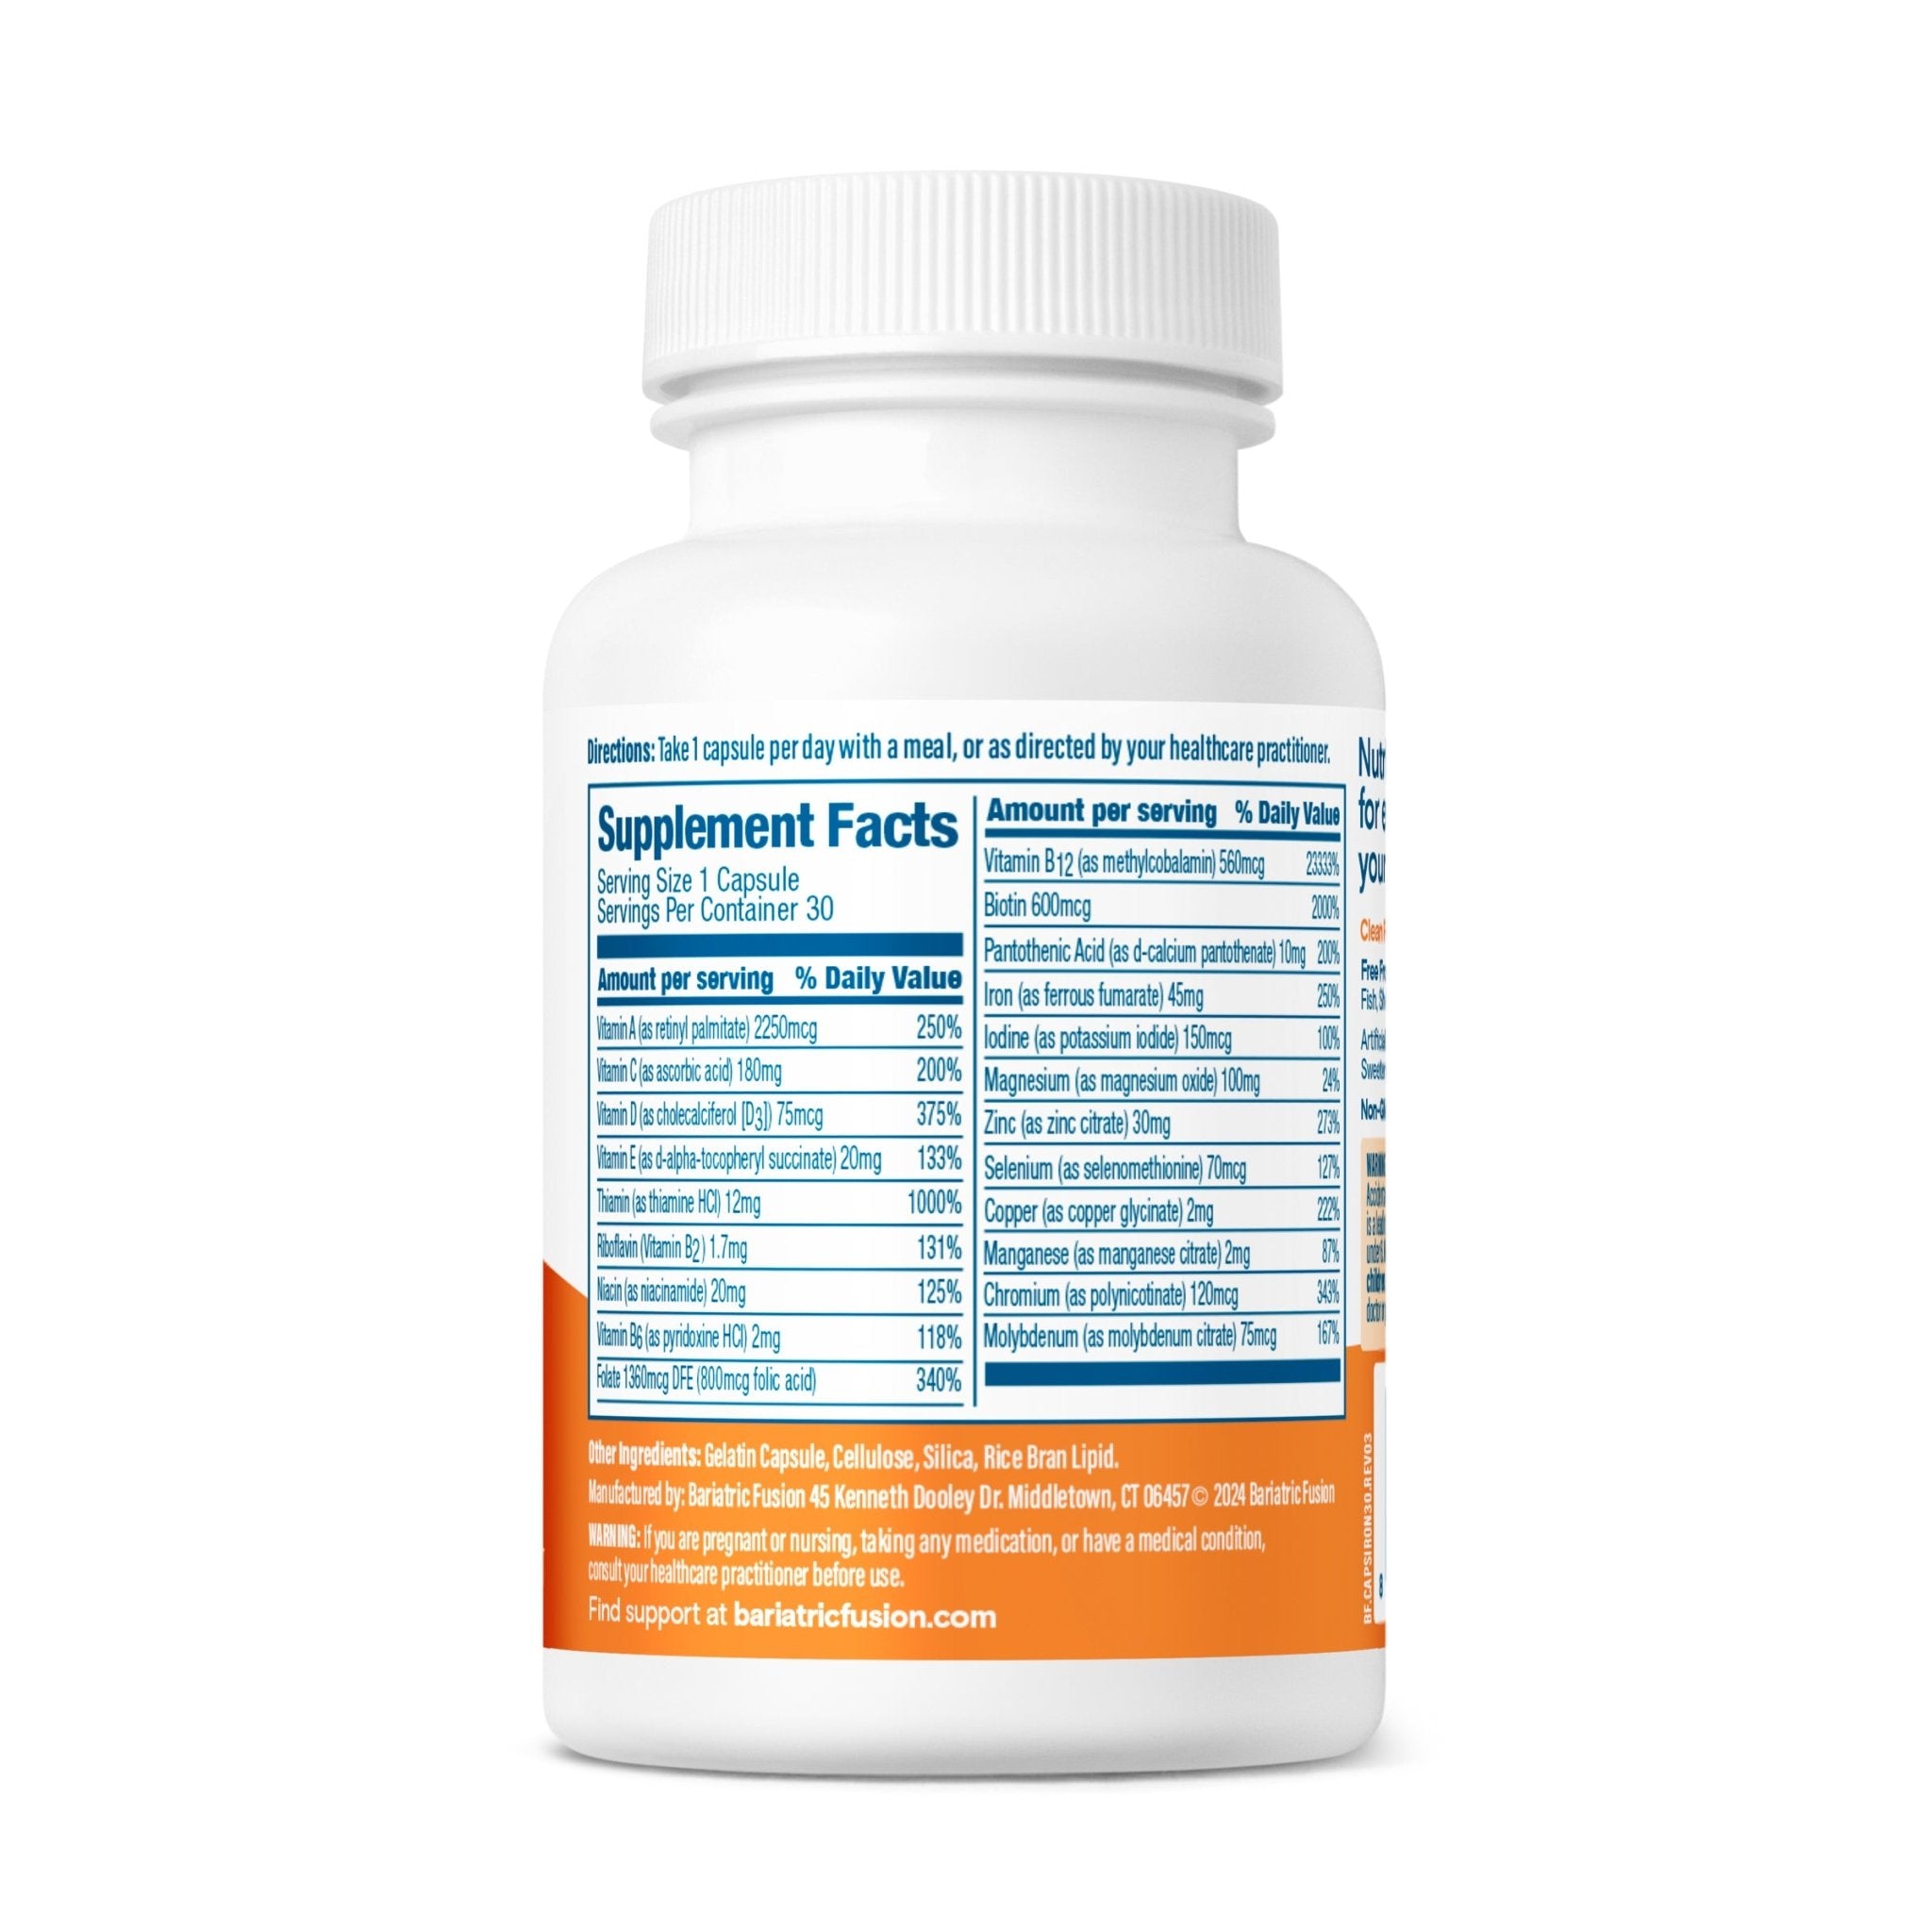 Bariatric Multivitamin Capsule without Iron 60 capsules directions, servings and ingredients.